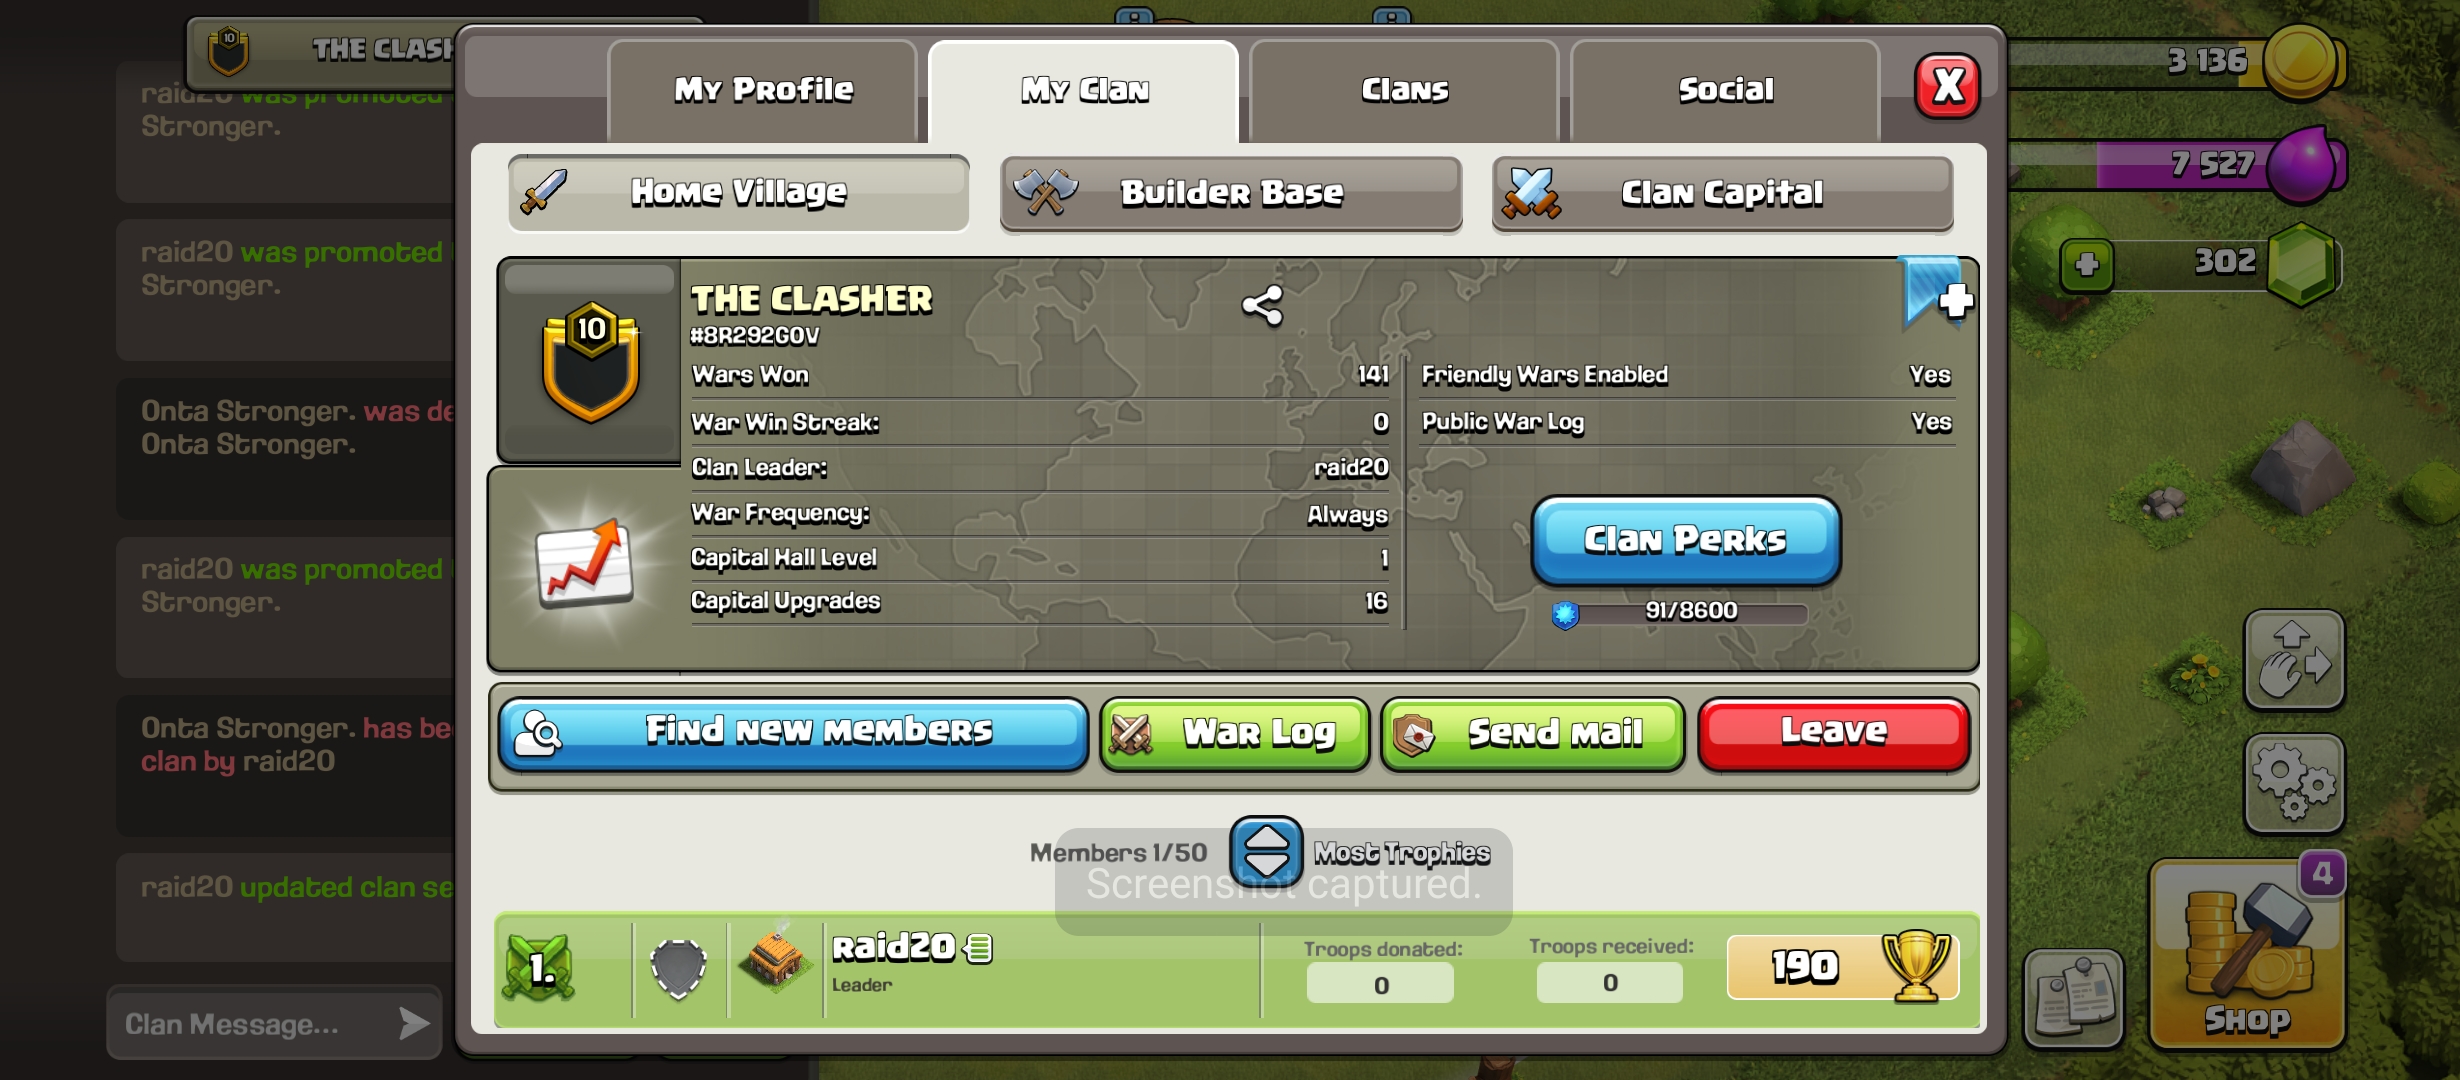 Clan Level 10 | Name : THE CLASHER | W 141 , L 137 | League : Unranked | Capital Hall 1